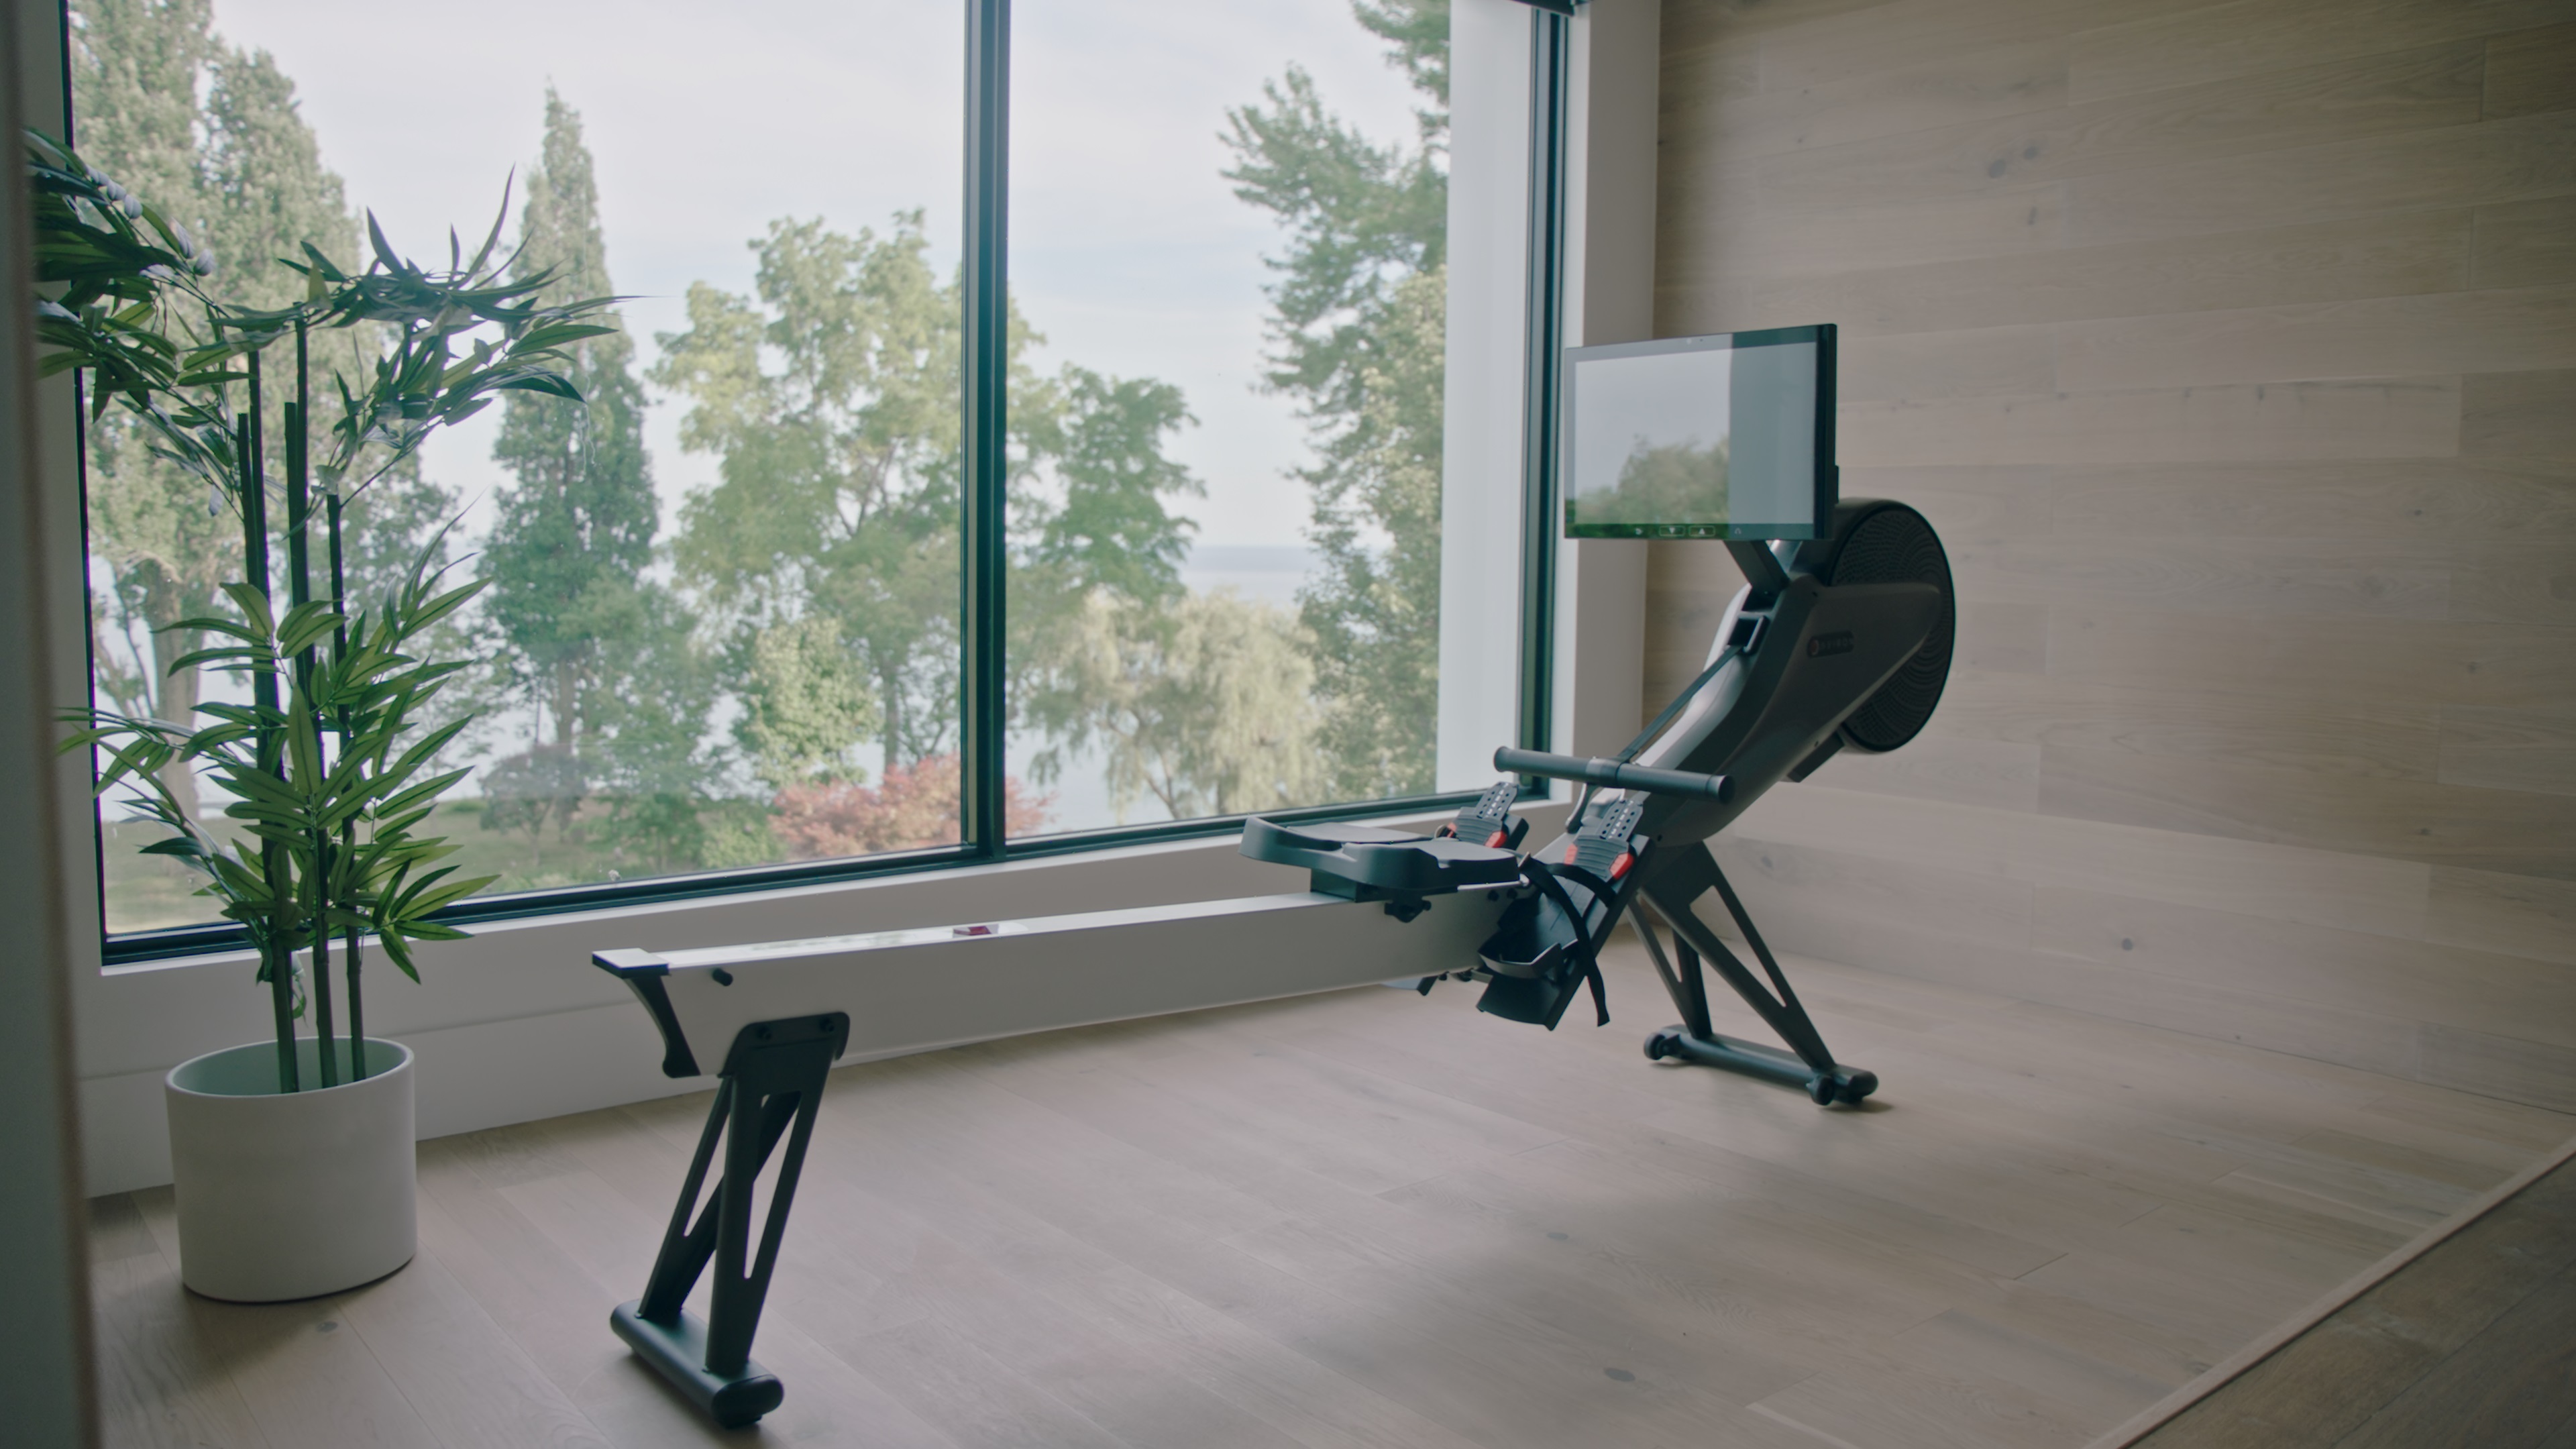 A photo of the Aviron Impact Series Rower